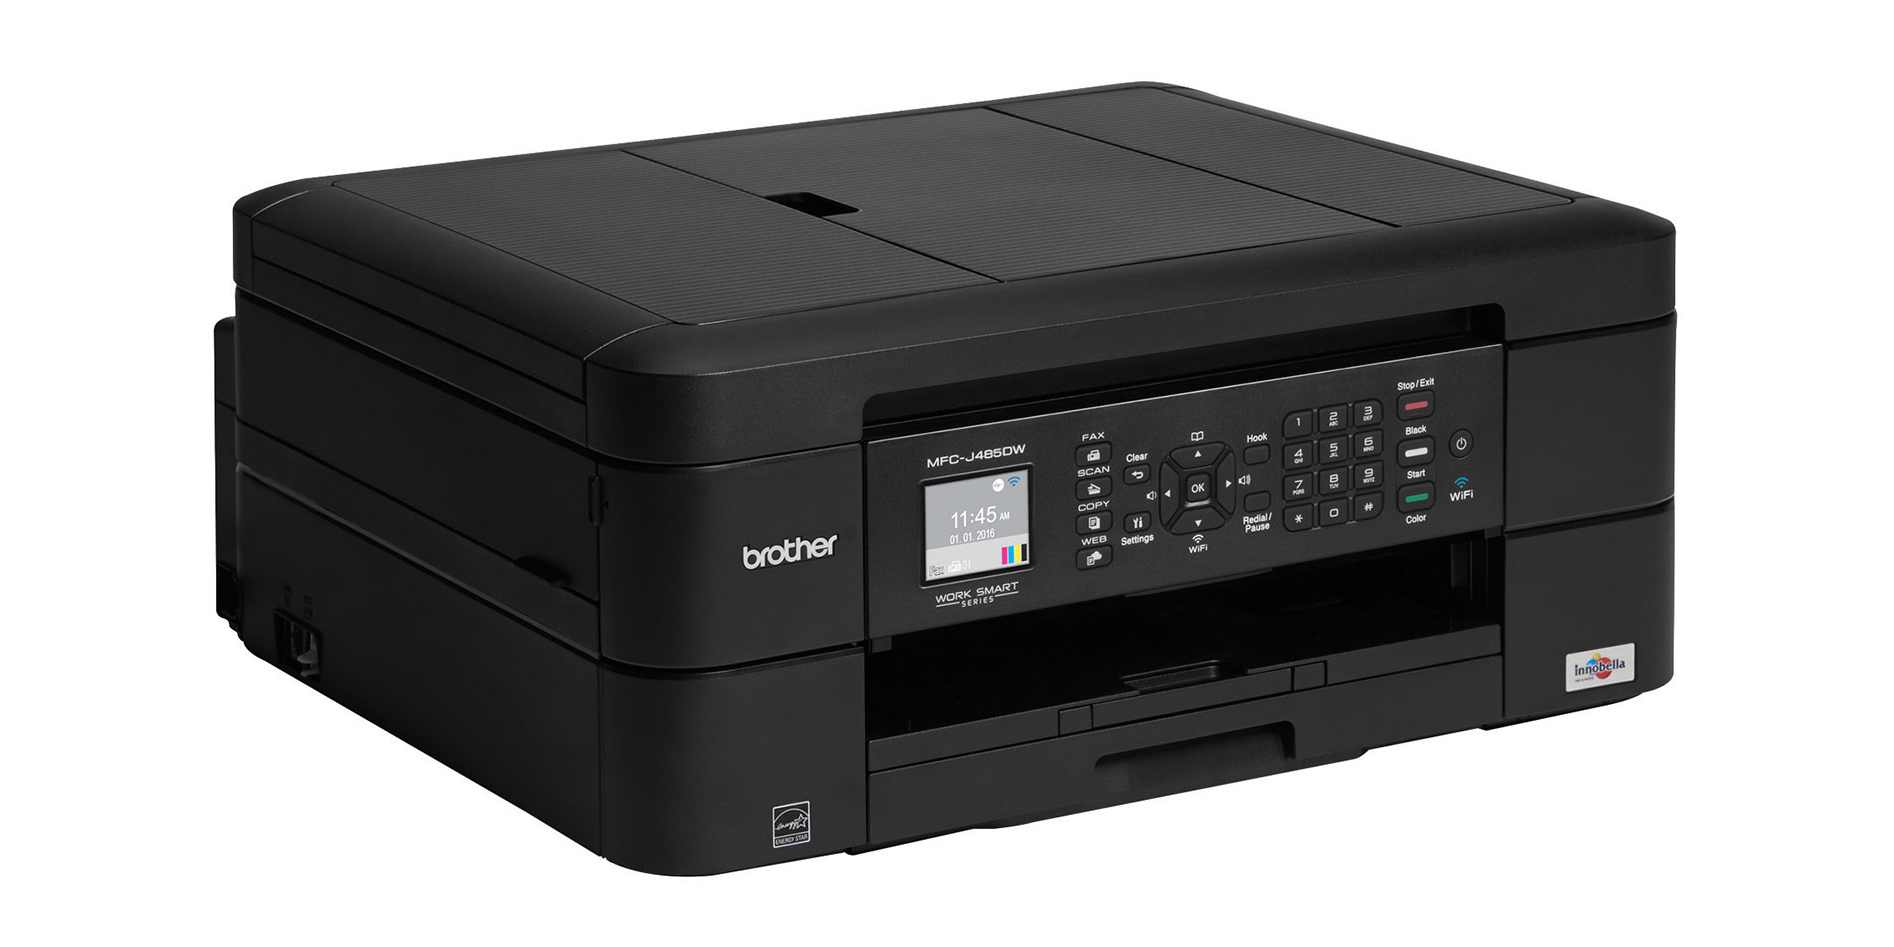 This Brother AllinOne Printer with AirPrint is priced to